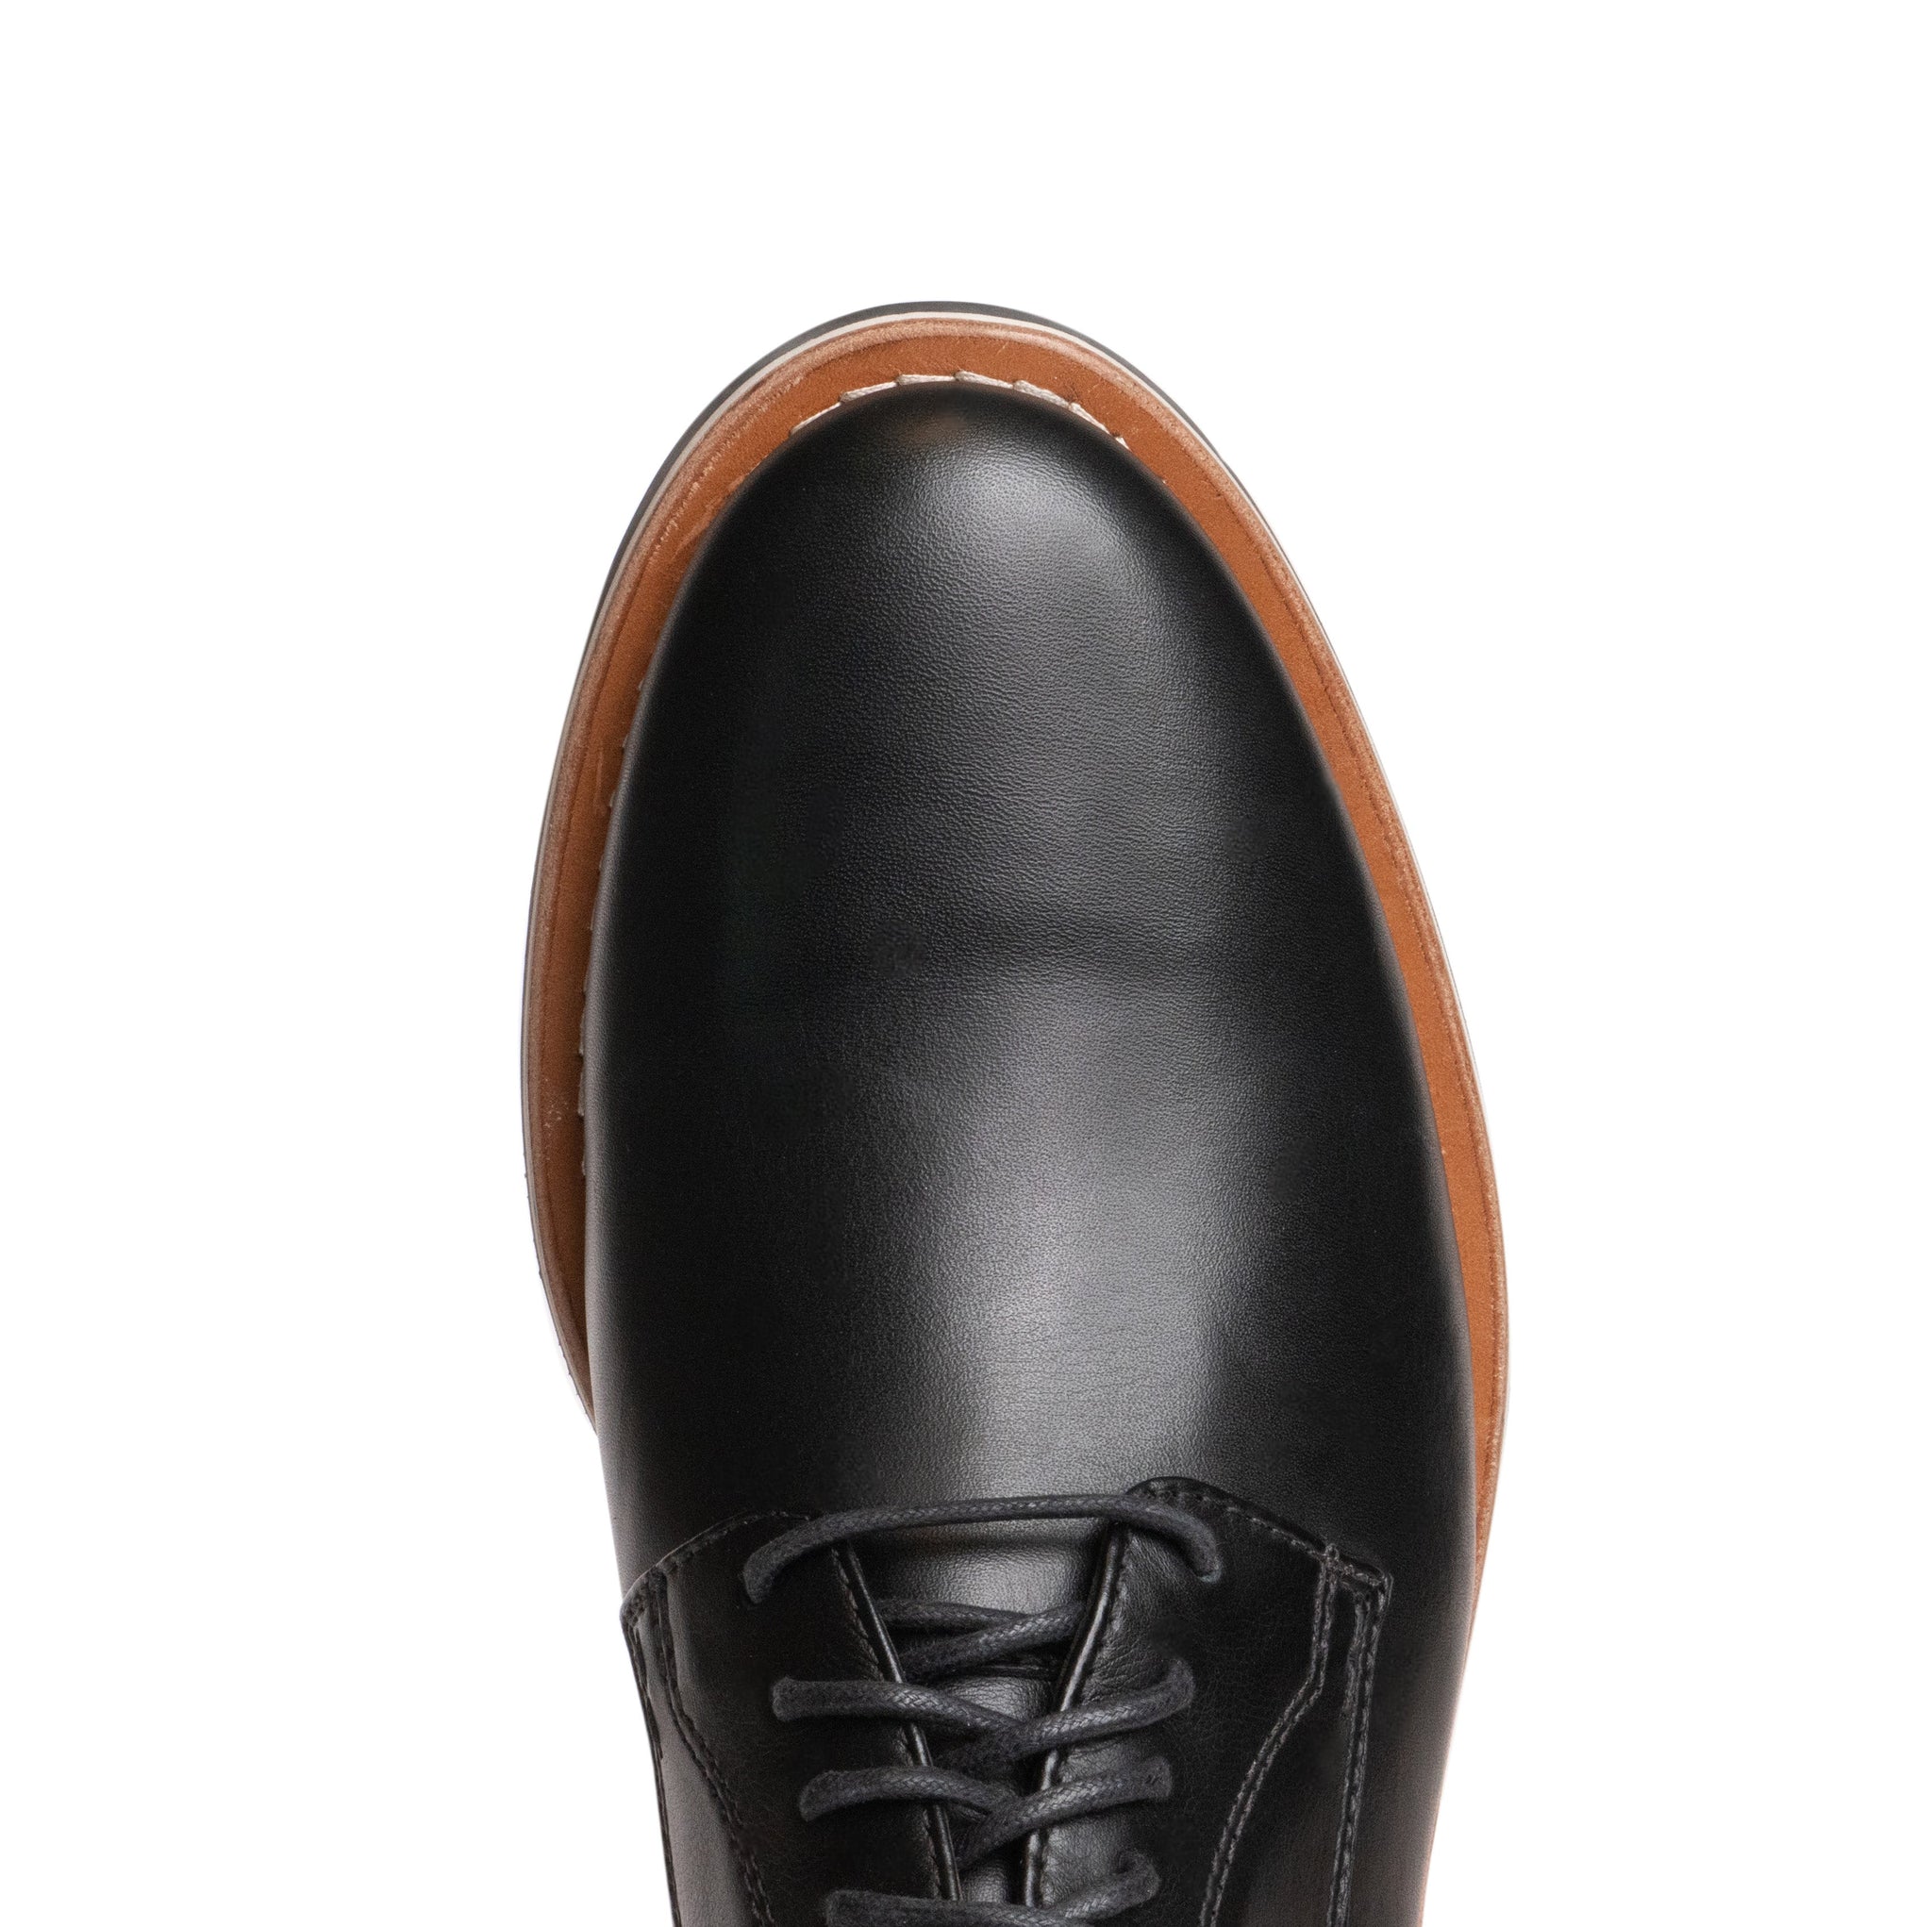 The Evans Black by HELM Boots